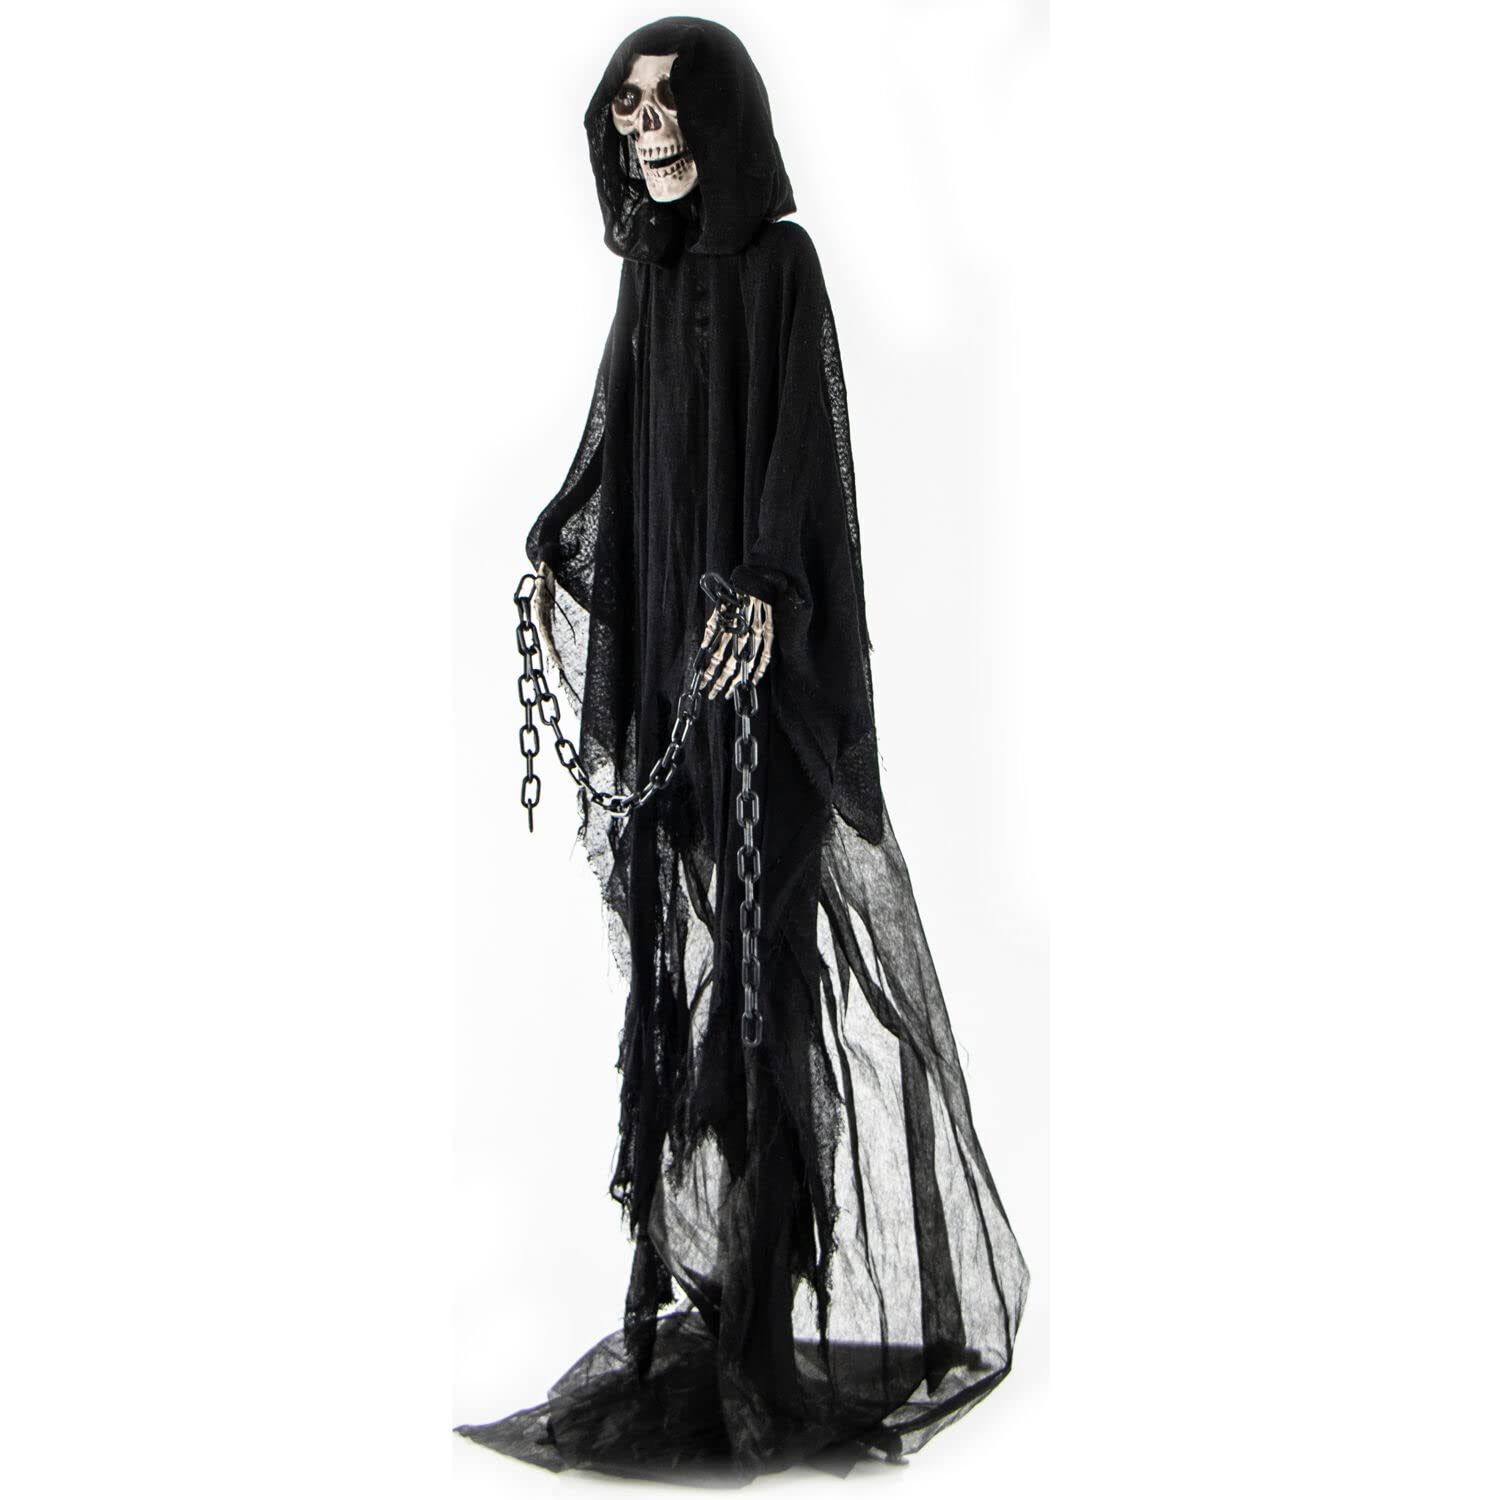 Haunted Hill Farm Life-Size Animated Grim Reaper Prop w/Chain and Rotating Head for Indoor or Outdoor Halloween Decoration, Battery-Operated